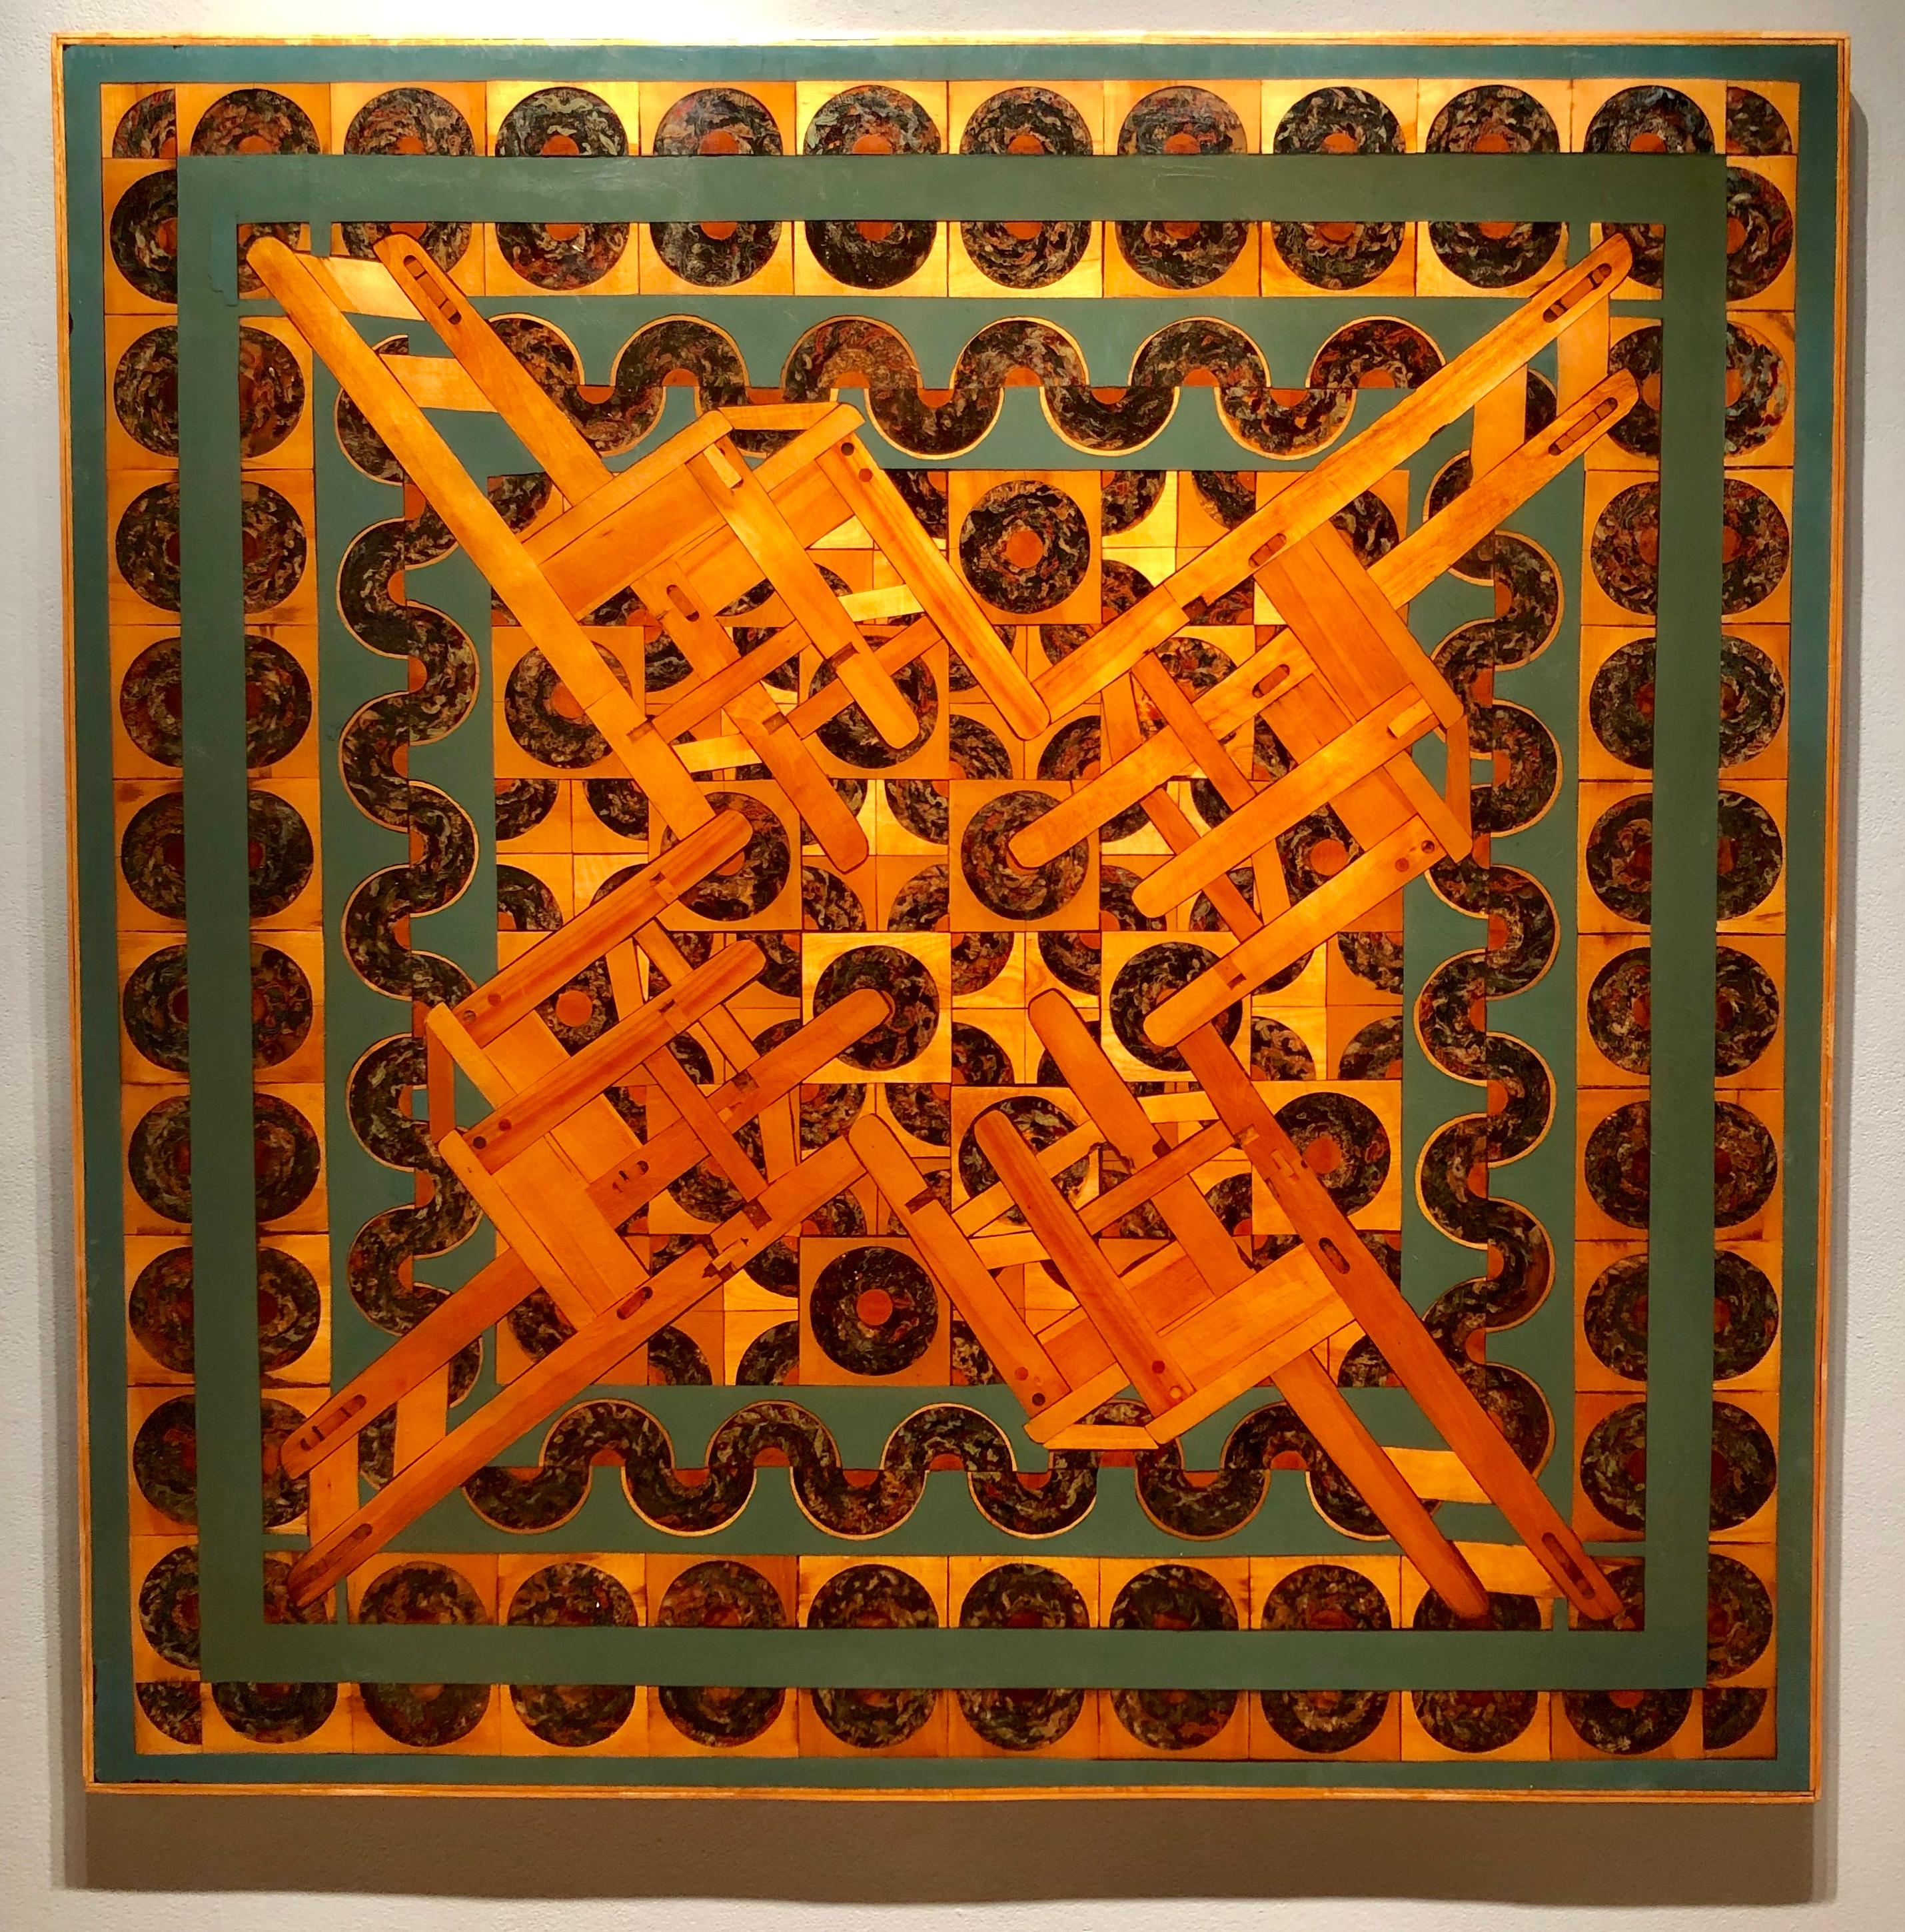 Kaleidoscope, large scale inlaid wood composition, chairs and abstract patterns - Painting by Margaret Wharton